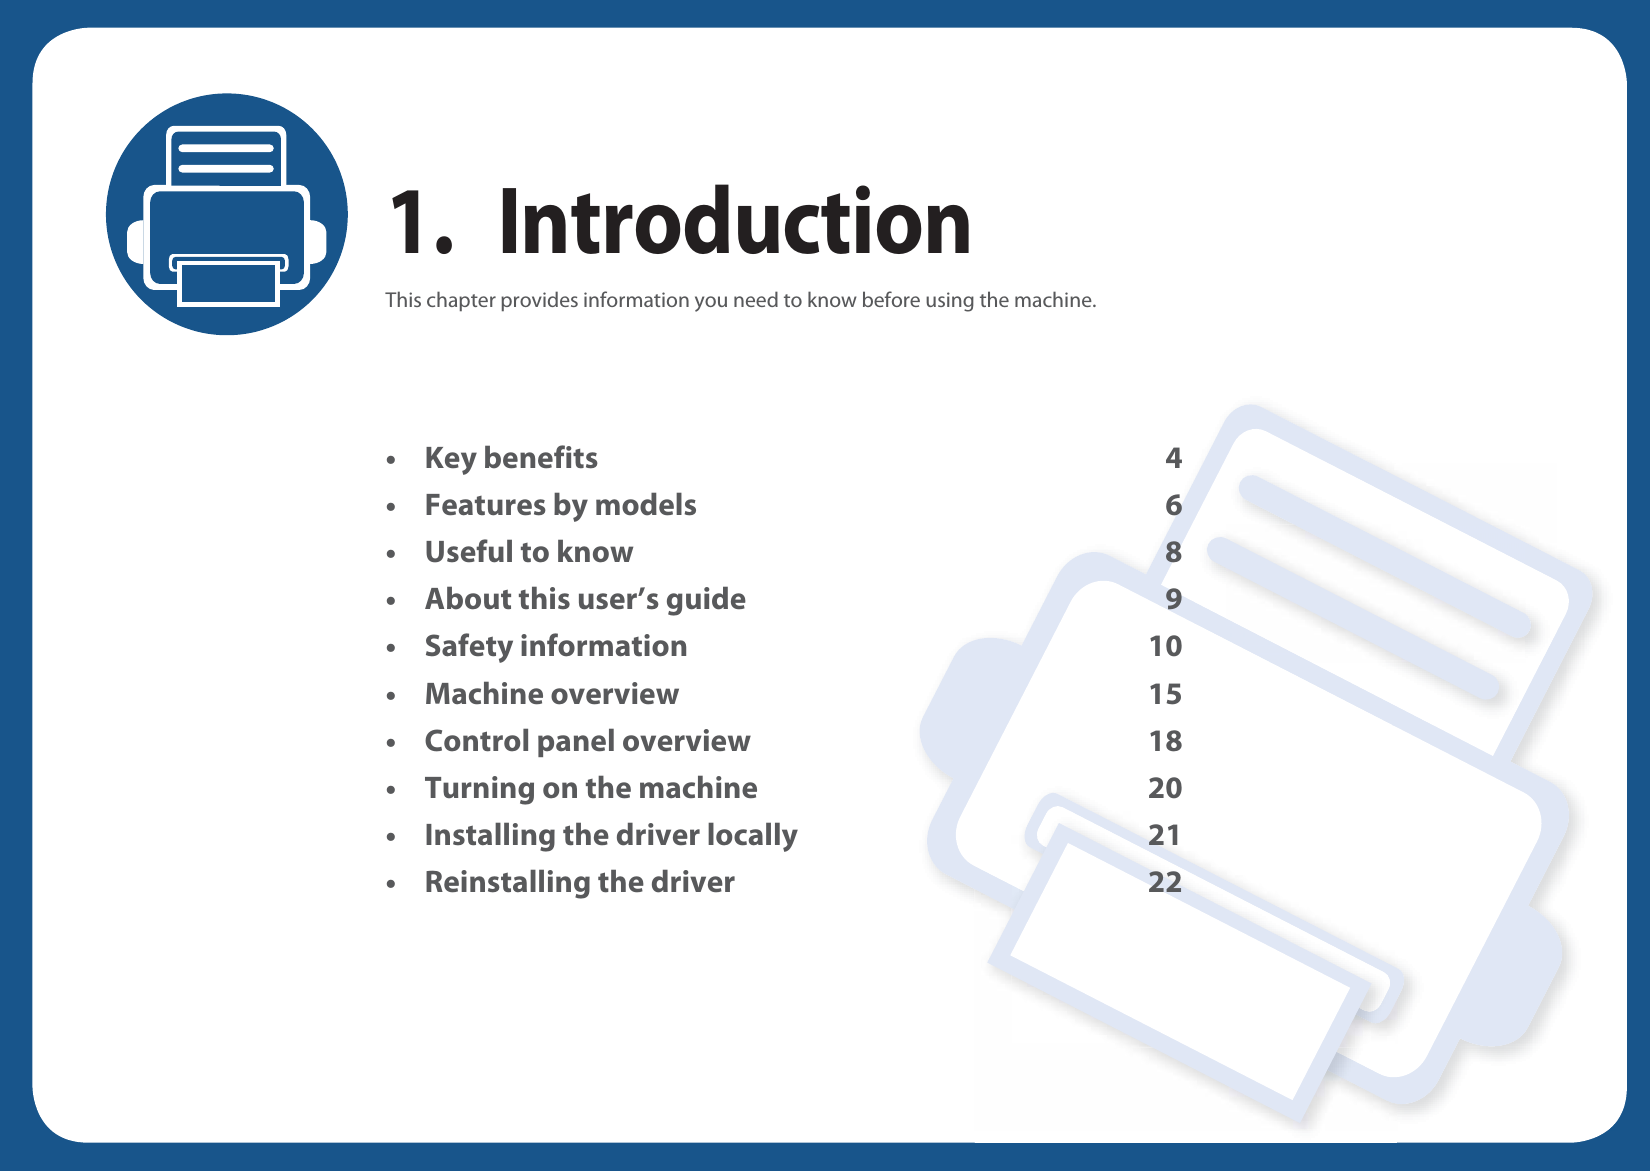 1. IntroductionThis chapter provides information you need to know before using the machine.• Key benefits 4• Features by models 6• Useful to know 8• About this user’s guide 9• Safety information 10• Machine overview 15• Control panel overview 18• Turning on the machine 20• Installing the driver locally 21• Reinstalling the driver 22